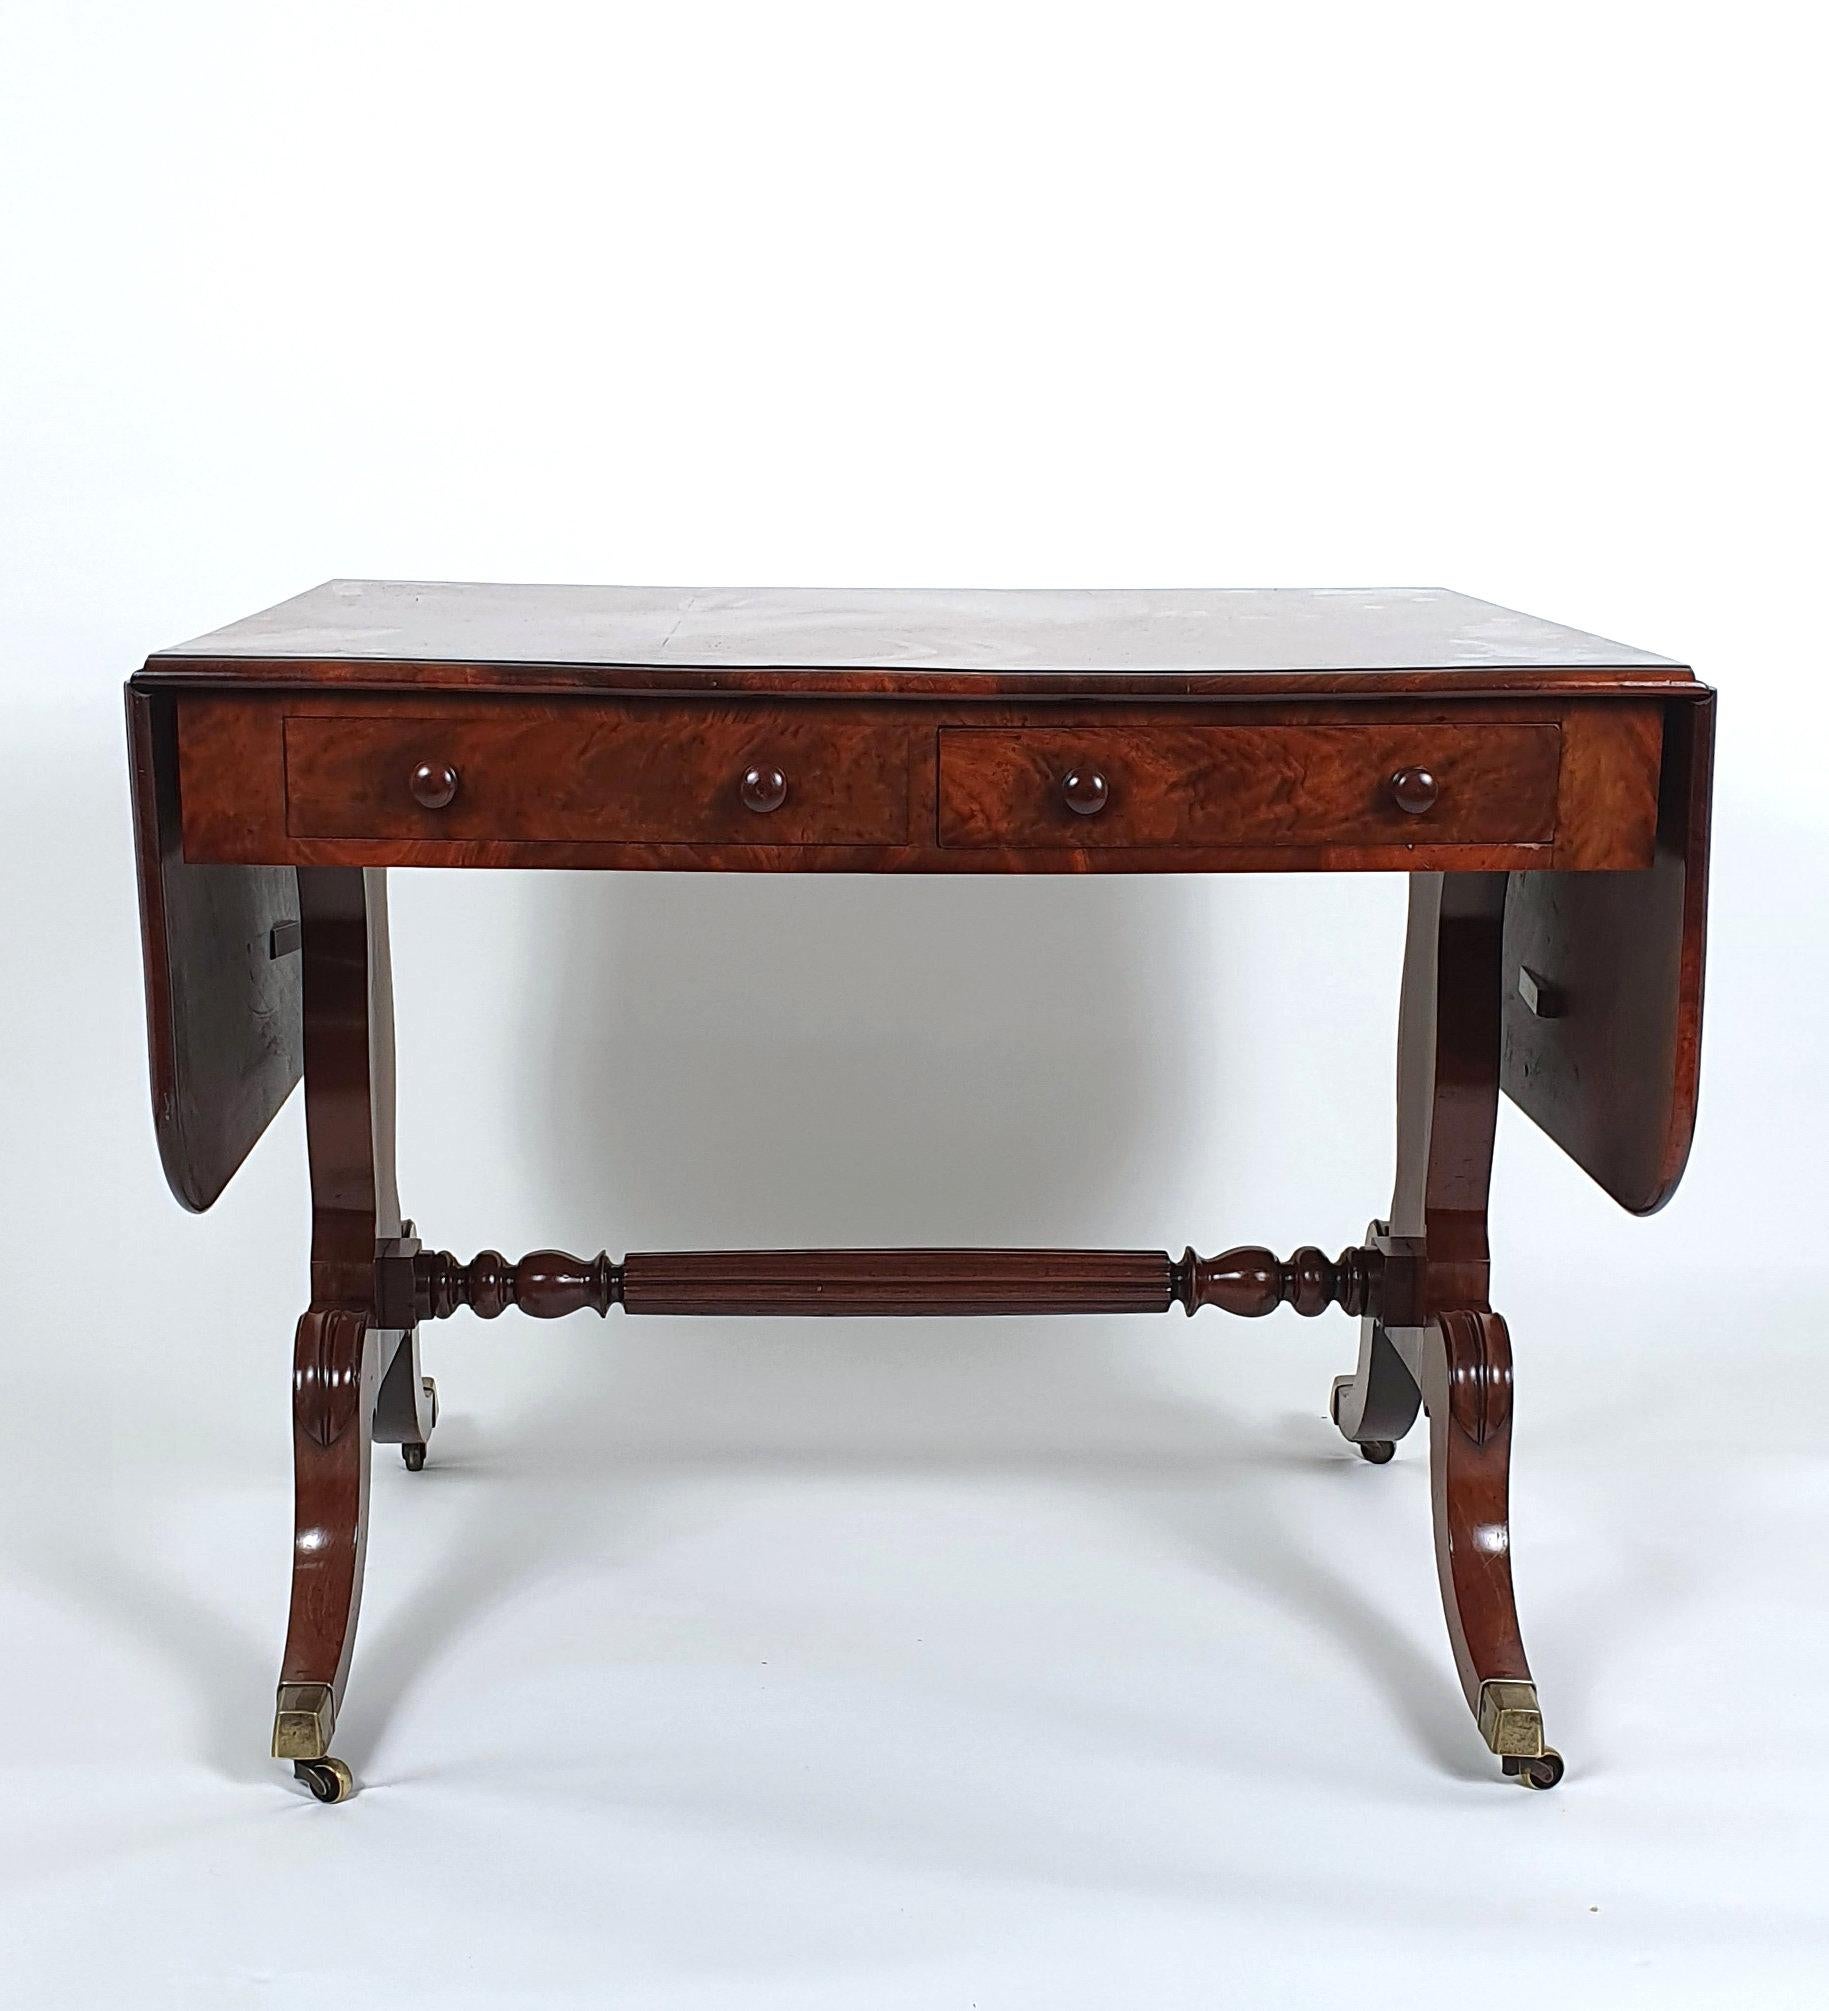 This very handsome and well-proportioned Regency figured solid mahogany sofa table features one true and one dummy drawer to each side and is supported on swept supports which are united by a central turned stretcher base. The table measures: 30 in,